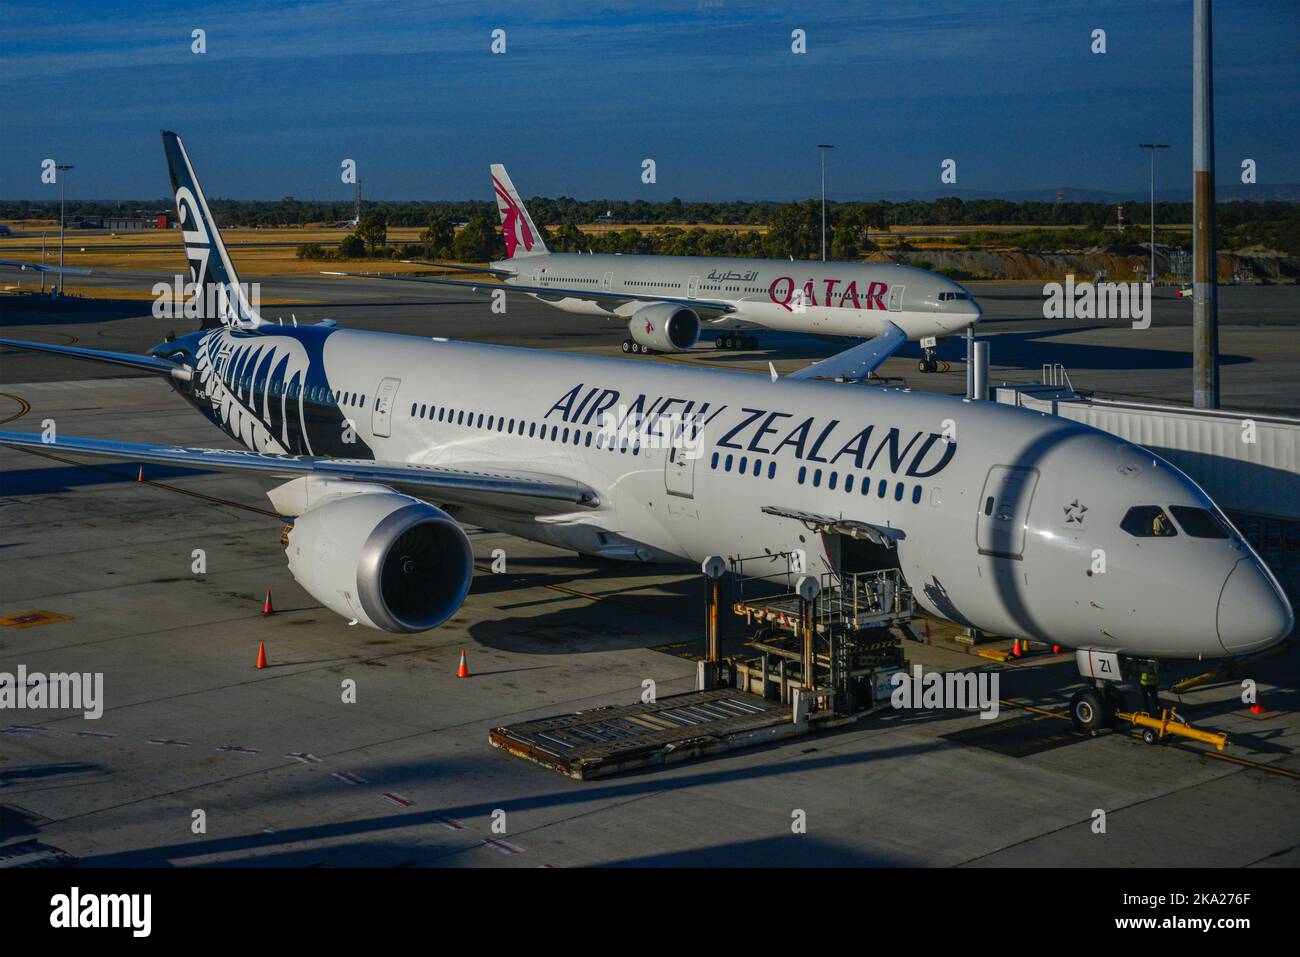 A stationary Air New Zealand Boeing 787 Dreamliner, and a Qatar Boeing 777 at an airport terminal. Stock Photo